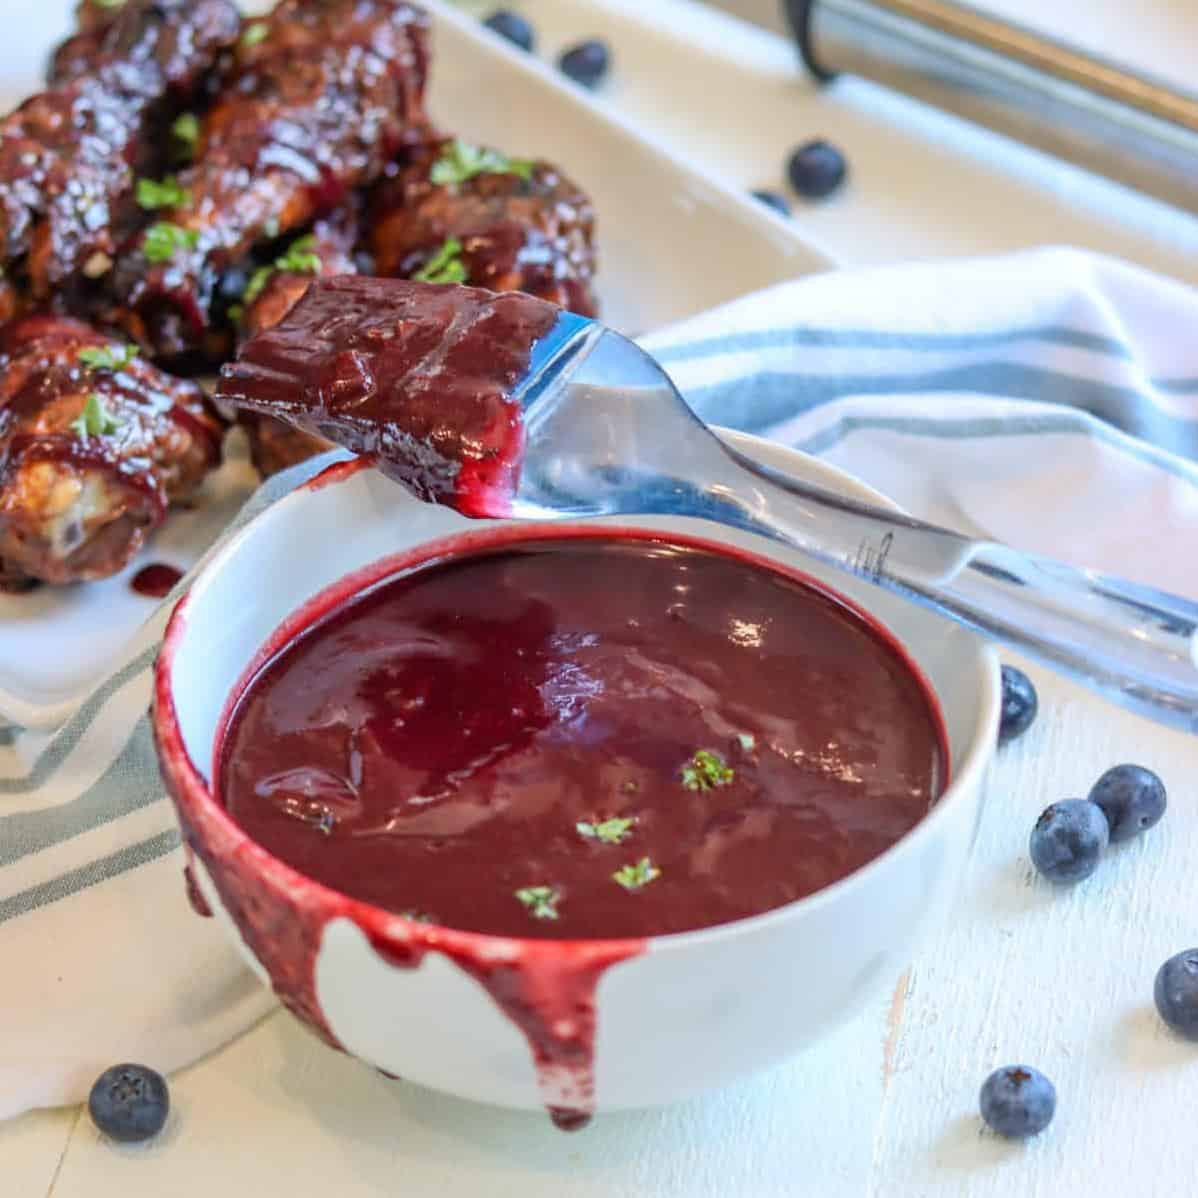  Give your ribs a pop of color and flavor with this Blueberry BBQ sauce.